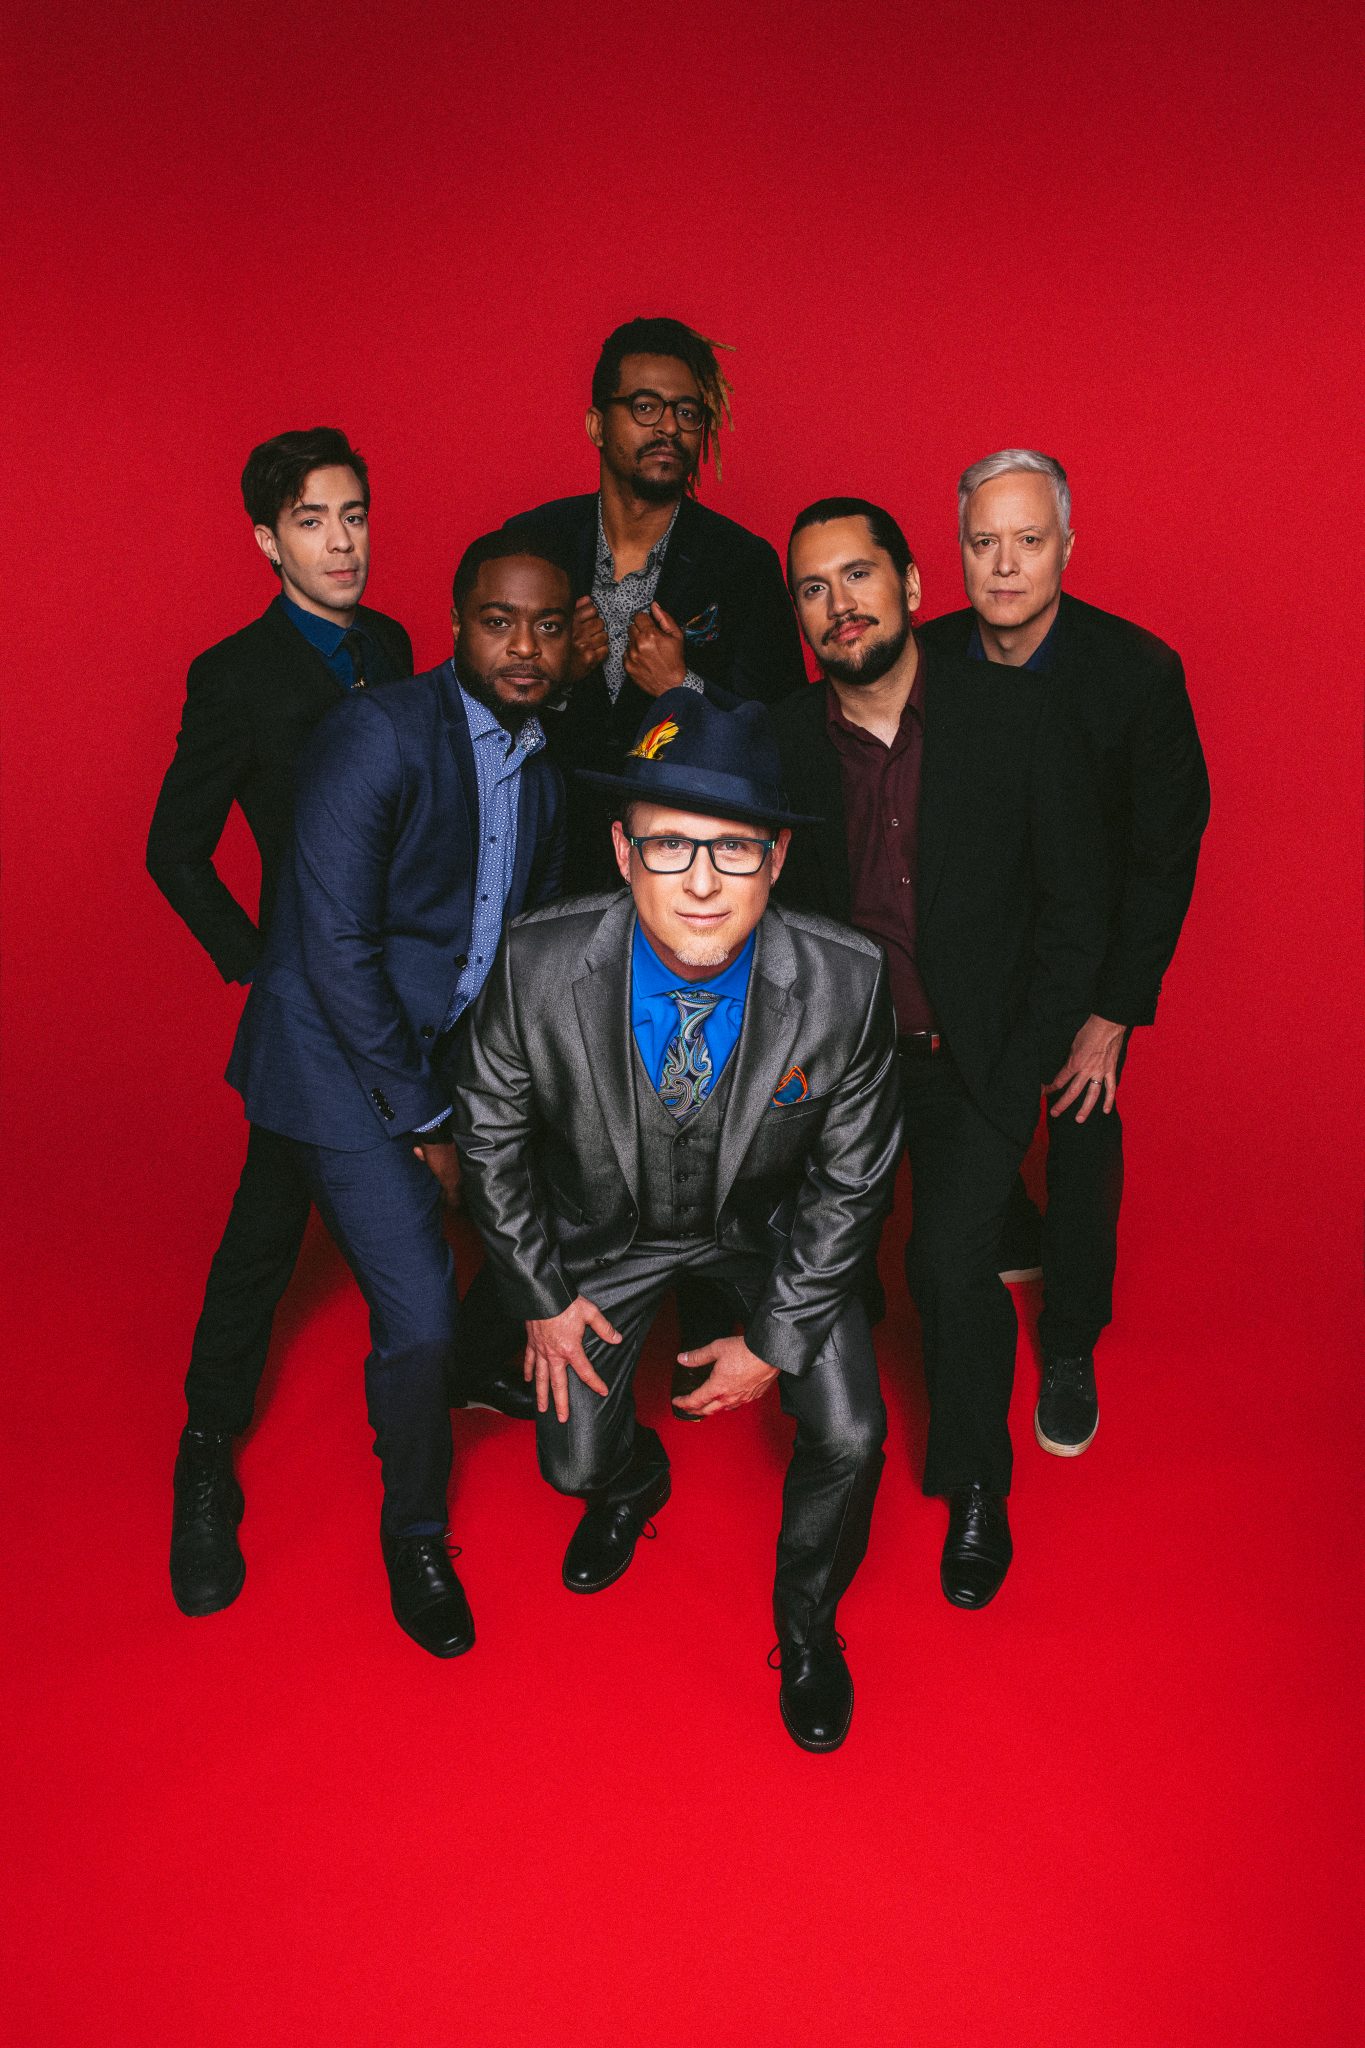 Nation Beat, a jazz group of six, poses in front of a red background, with drummer Scott Kettner standing in front.